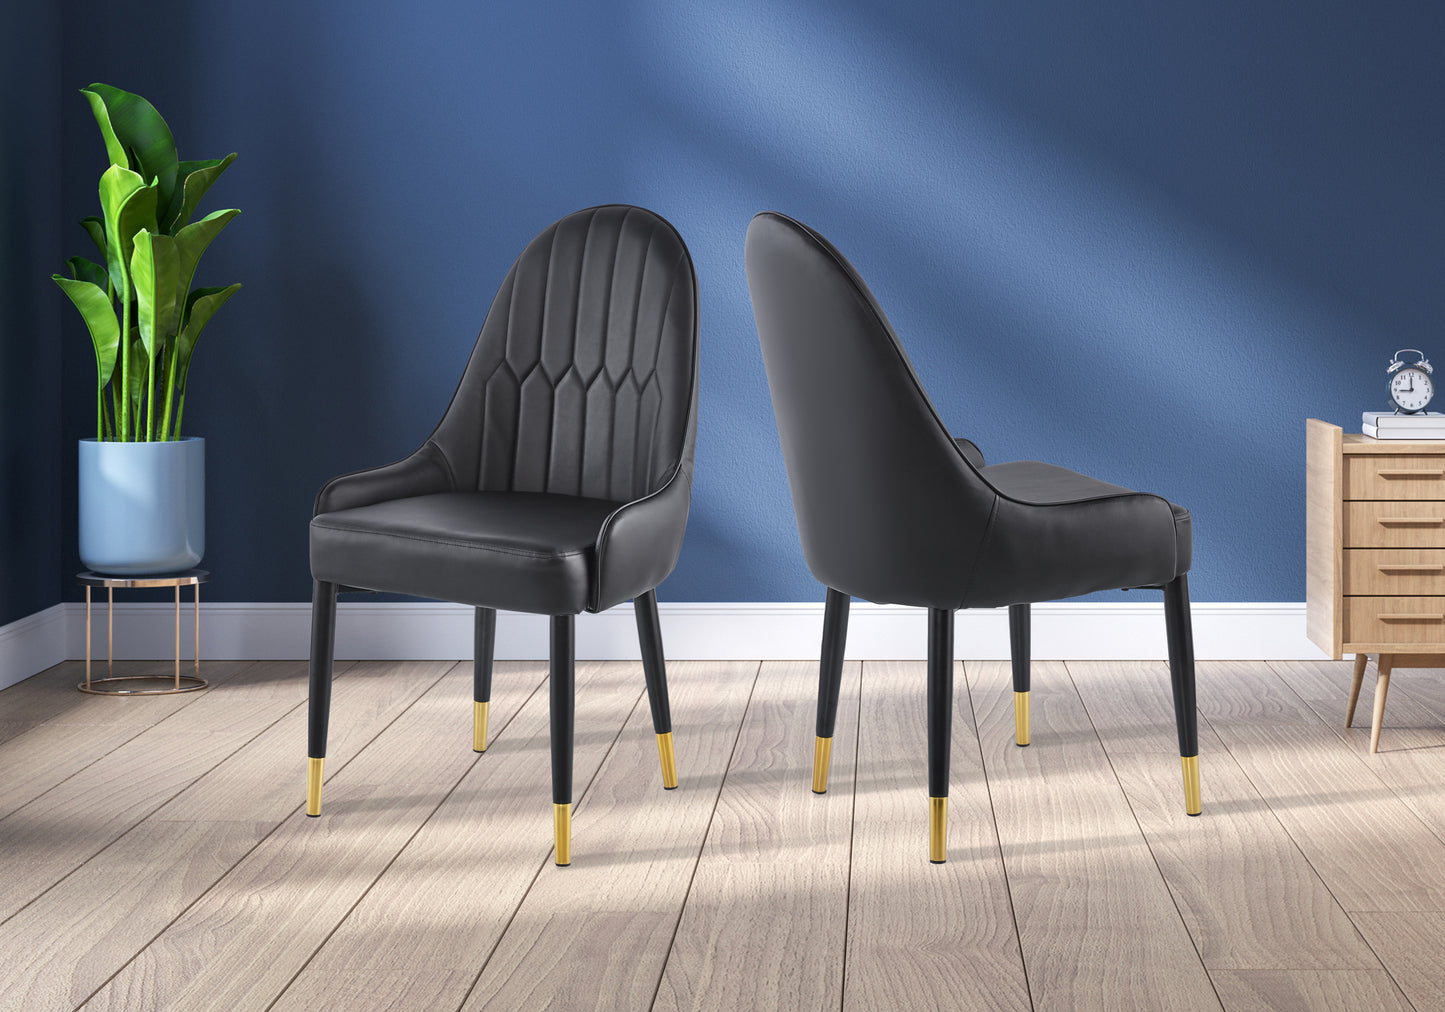 Modern Leatherette Dining Chair Set of 2, Upholstered Accent Dining Chair, Legs with Black Plastic Tube Plug